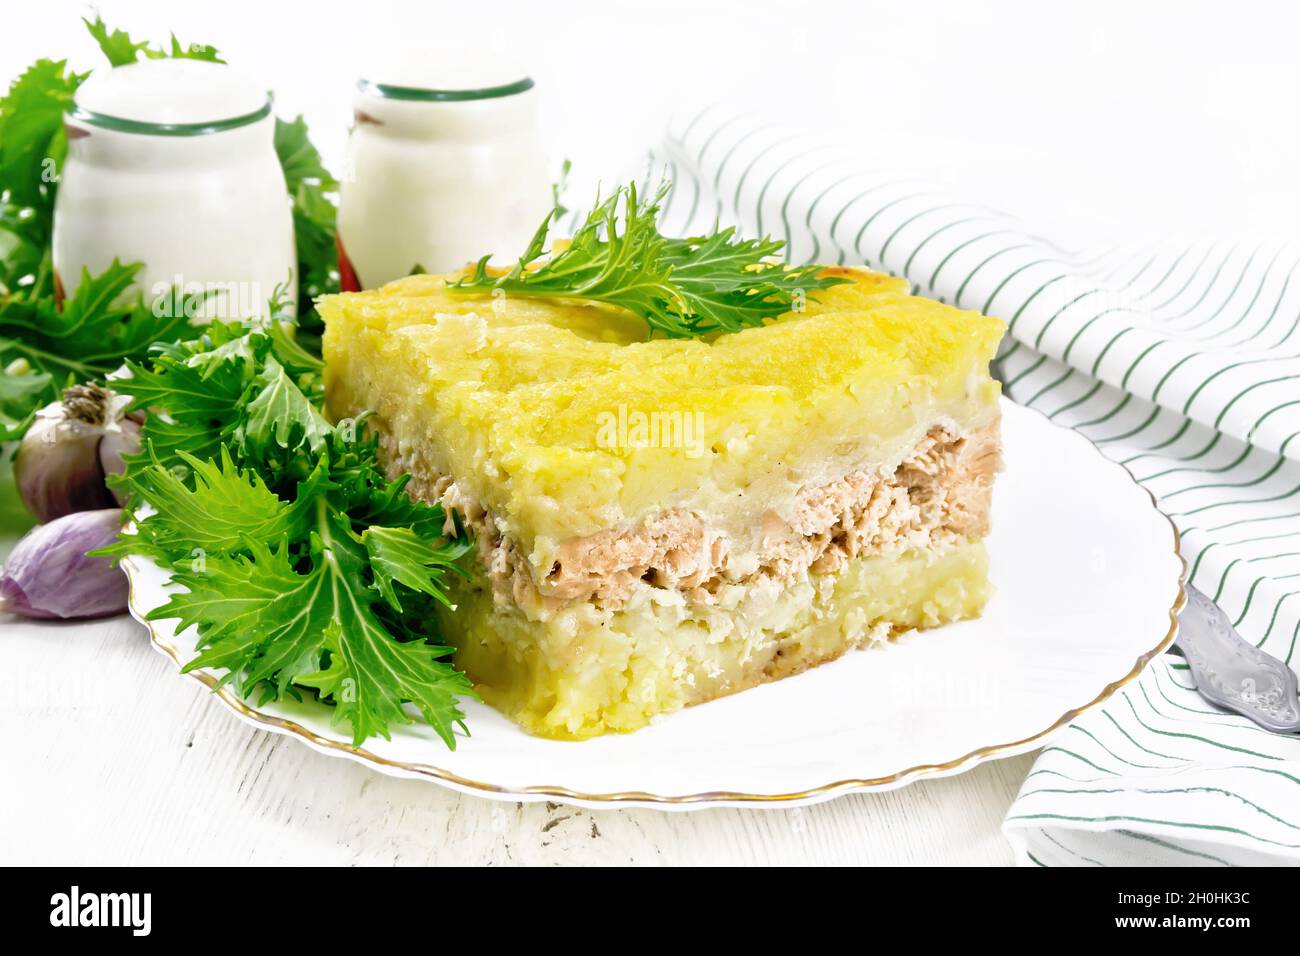 Mashed potato casserole with salmon fillet and lettuce in a plate, kitchen towel, garlic on the background of a light wooden board Stock Photo